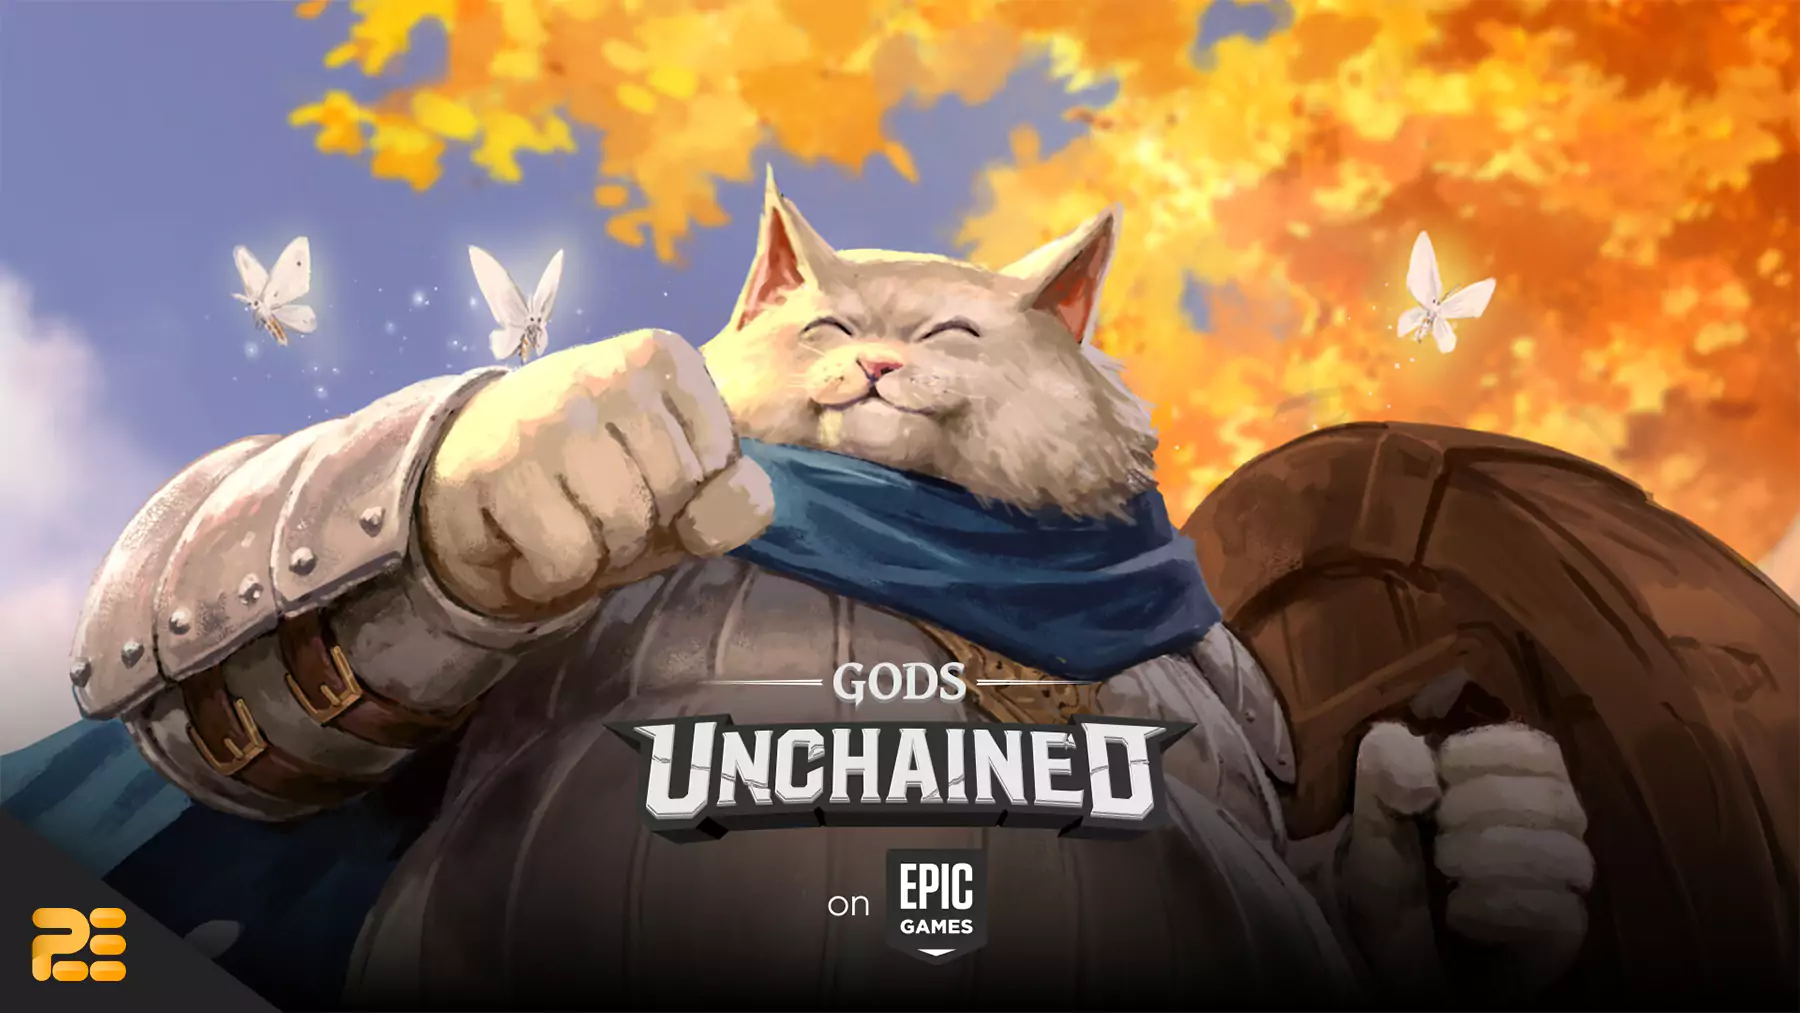 gods-unchained-epic